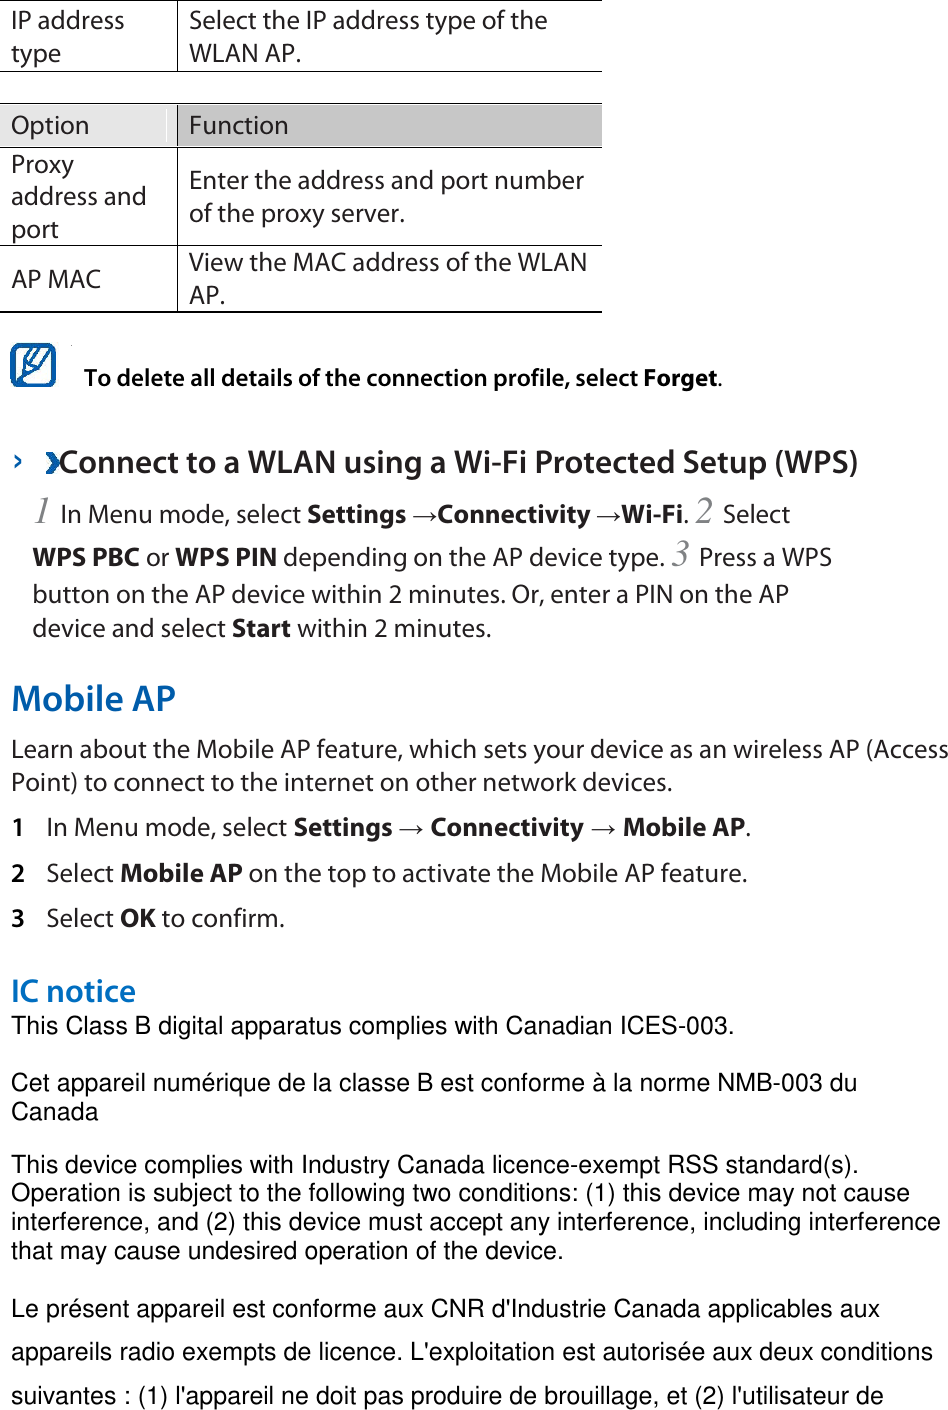 IP address type   Select the IP address type of the WLAN AP.    Option   Function   Proxy address and port   Enter the address and port number of the proxy server.   AP MAC   View the MAC address of the WLAN AP.     To delete all details of the connection profile, select Forget.   ›  Connect to a WLAN using a Wi-Fi Protected Setup (WPS)   1 In Menu mode, select Settings →Connectivity →Wi-Fi. 2 Select WPS PBC or WPS PIN depending on the AP device type. 3 Press a WPS button on the AP device within 2 minutes. Or, enter a PIN on the AP device and select Start within 2 minutes.   Mobile AP   Learn about the Mobile AP feature, which sets your device as an wireless AP (Access Point) to connect to the internet on other network devices.   1  In Menu mode, select Settings → Connectivity → Mobile AP.   2  Select Mobile AP on the top to activate the Mobile AP feature.   3  Select OK to confirm.    IC notice   This Class B digital apparatus complies with Canadian ICES-003.   Cet appareil numérique de la classe B est conforme à la norme NMB-003 du Canada   This device complies with Industry Canada licence-exempt RSS standard(s). Operation is subject to the following two conditions: (1) this device may not cause interference, and (2) this device must accept any interference, including interference that may cause undesired operation of the device.   Le présent appareil est conforme aux CNR d&apos;Industrie Canada applicables aux appareils radio exempts de licence. L&apos;exploitation est autorisée aux deux conditions suivantes : (1) l&apos;appareil ne doit pas produire de brouillage, et (2) l&apos;utilisateur de 